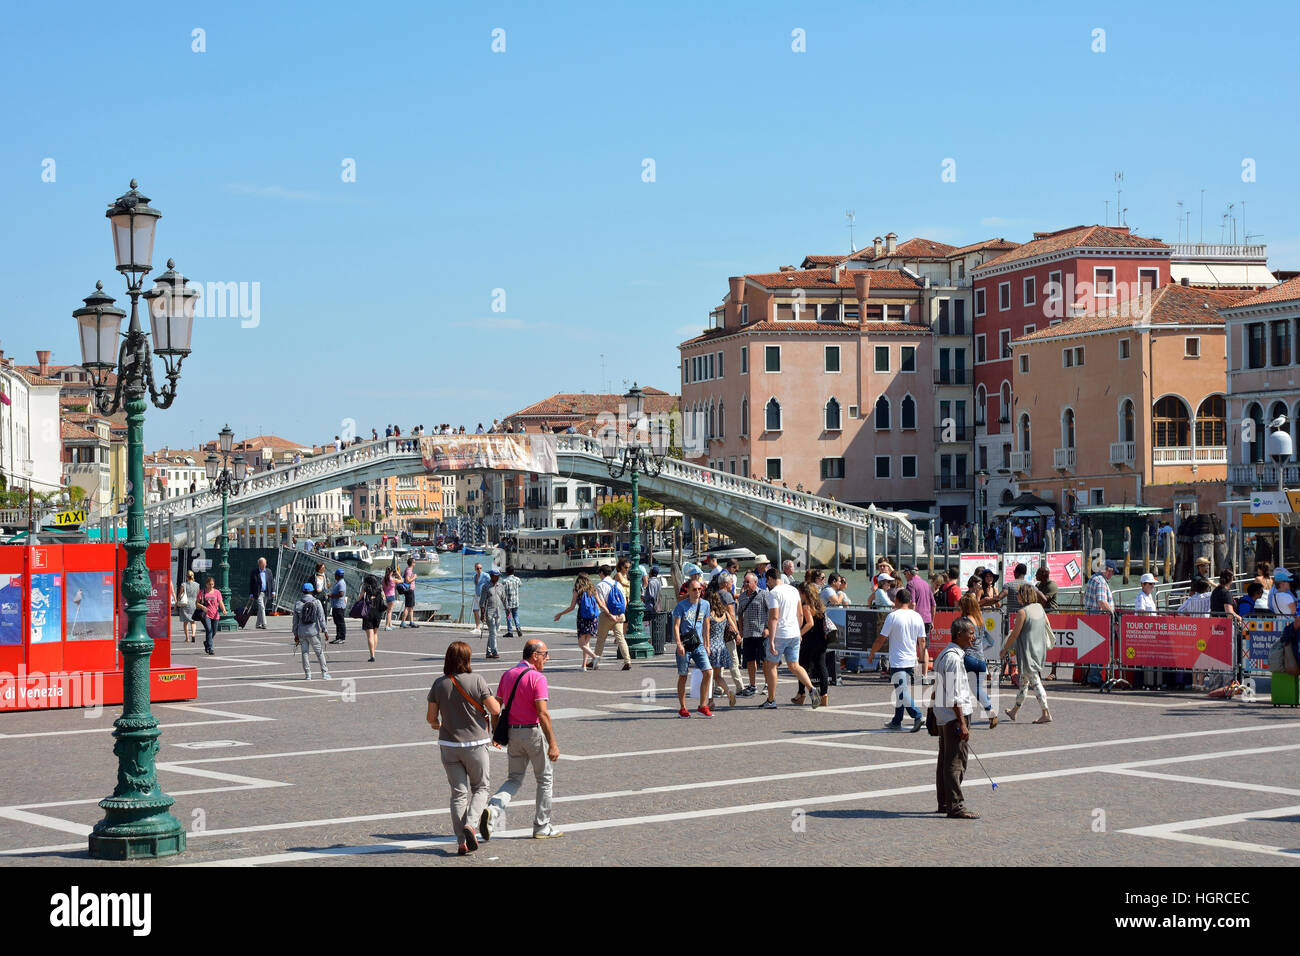 People before the Scalzi Bridge at the Grand Canal in Venice in Italy - Ponte degli Scalzi. Stock Photo